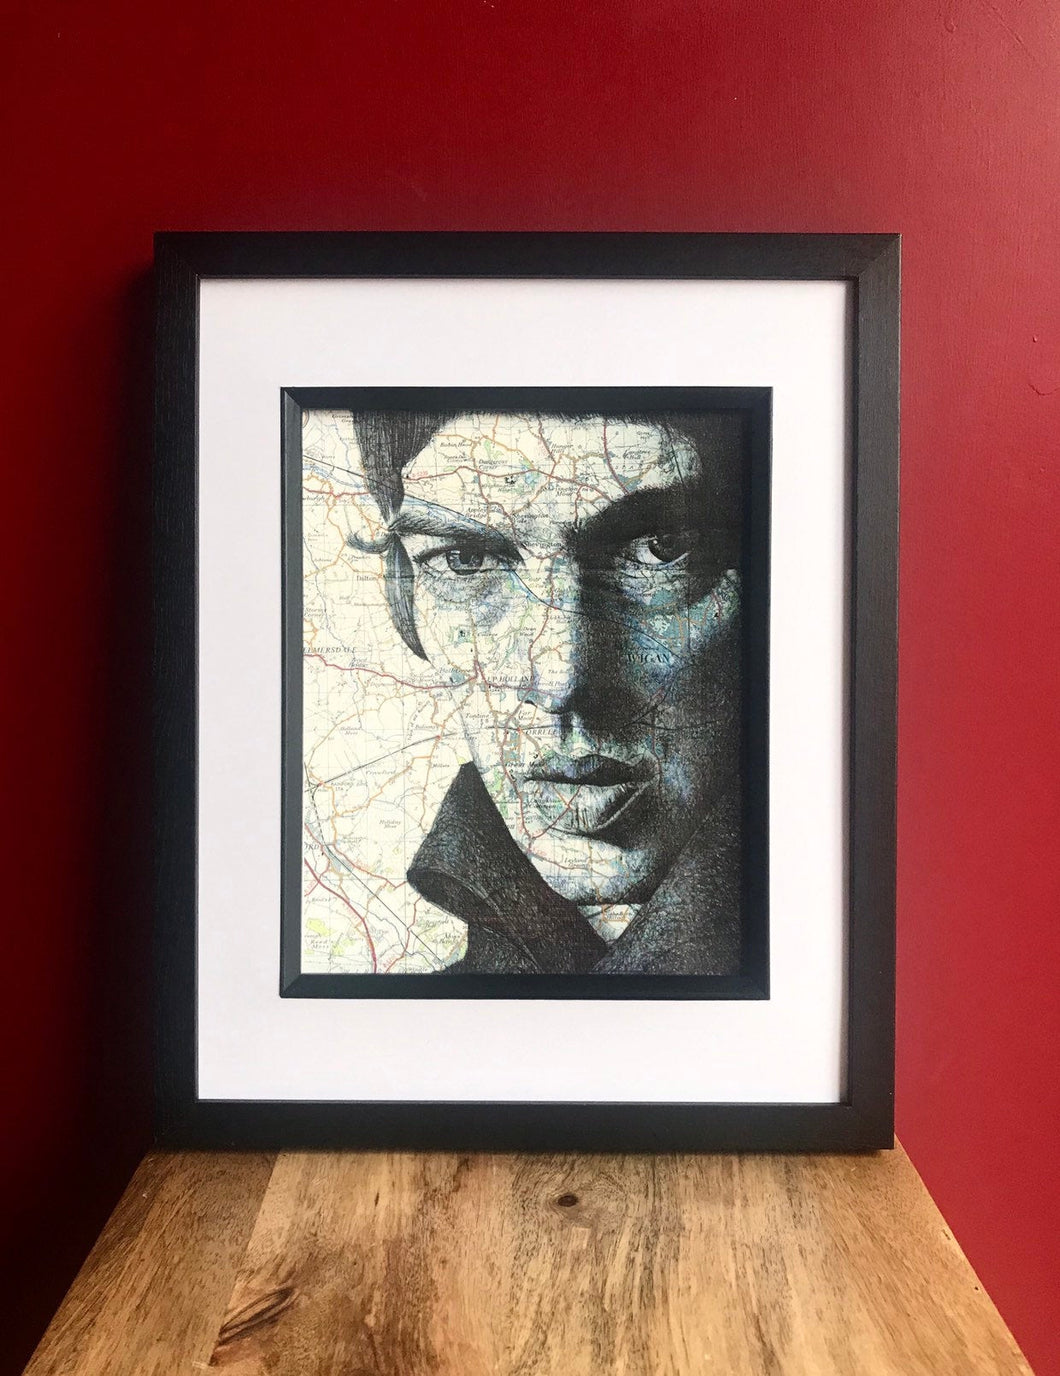 Richard Ashcroft: The Verve Art Print. Pen drawing over map of South London. A4 print Unframed.